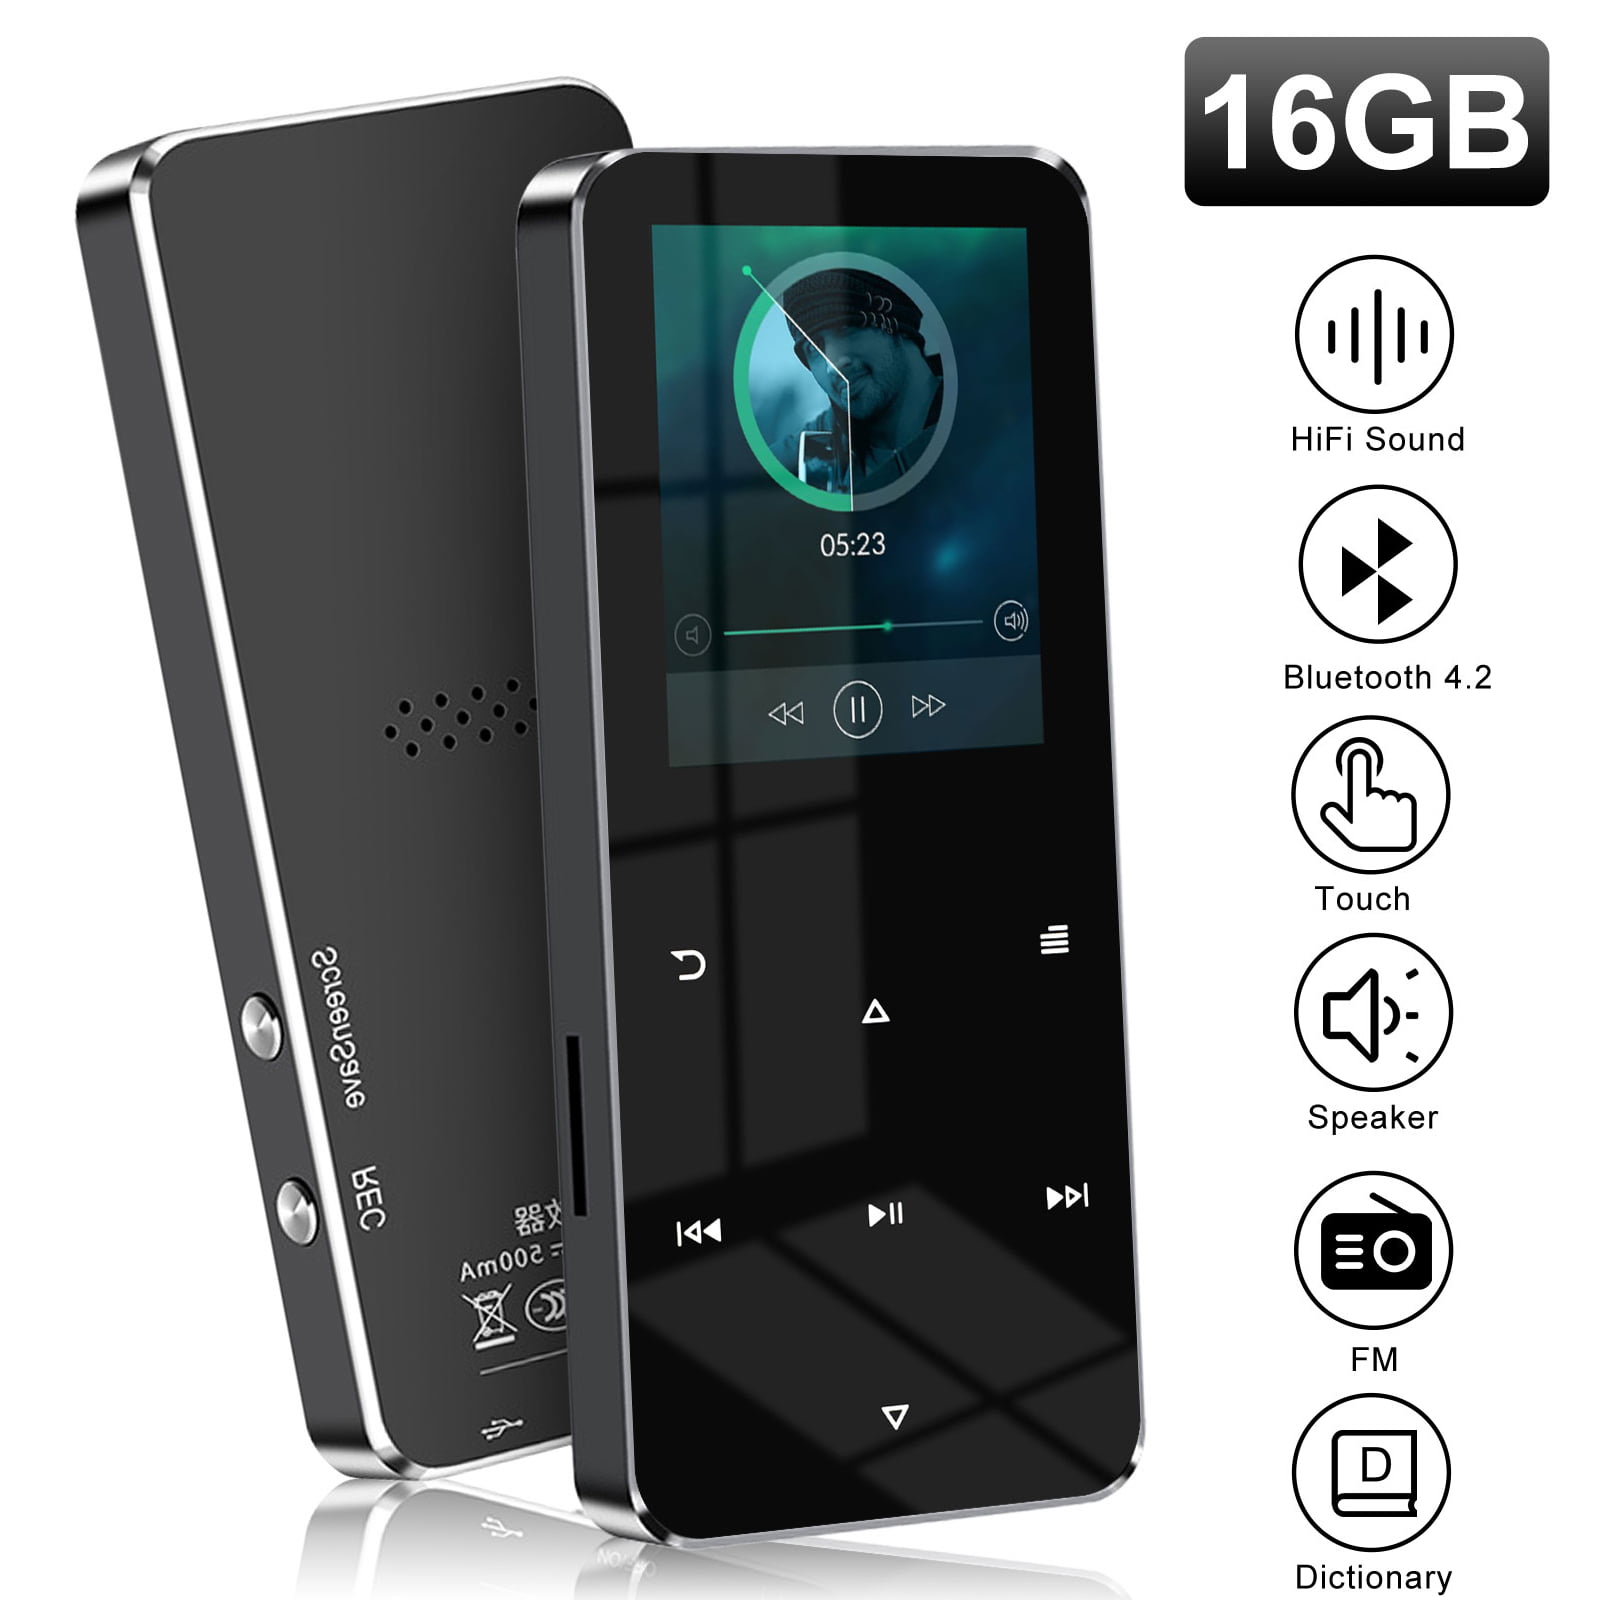 Expandable up to 128GB TF Card Pedometer with Armband and Earphone Voice Recorder MP3 Player Hi-Fi Lossless Sound Music Player with FM Radio 32GB MP3 Players with Bluetooth 